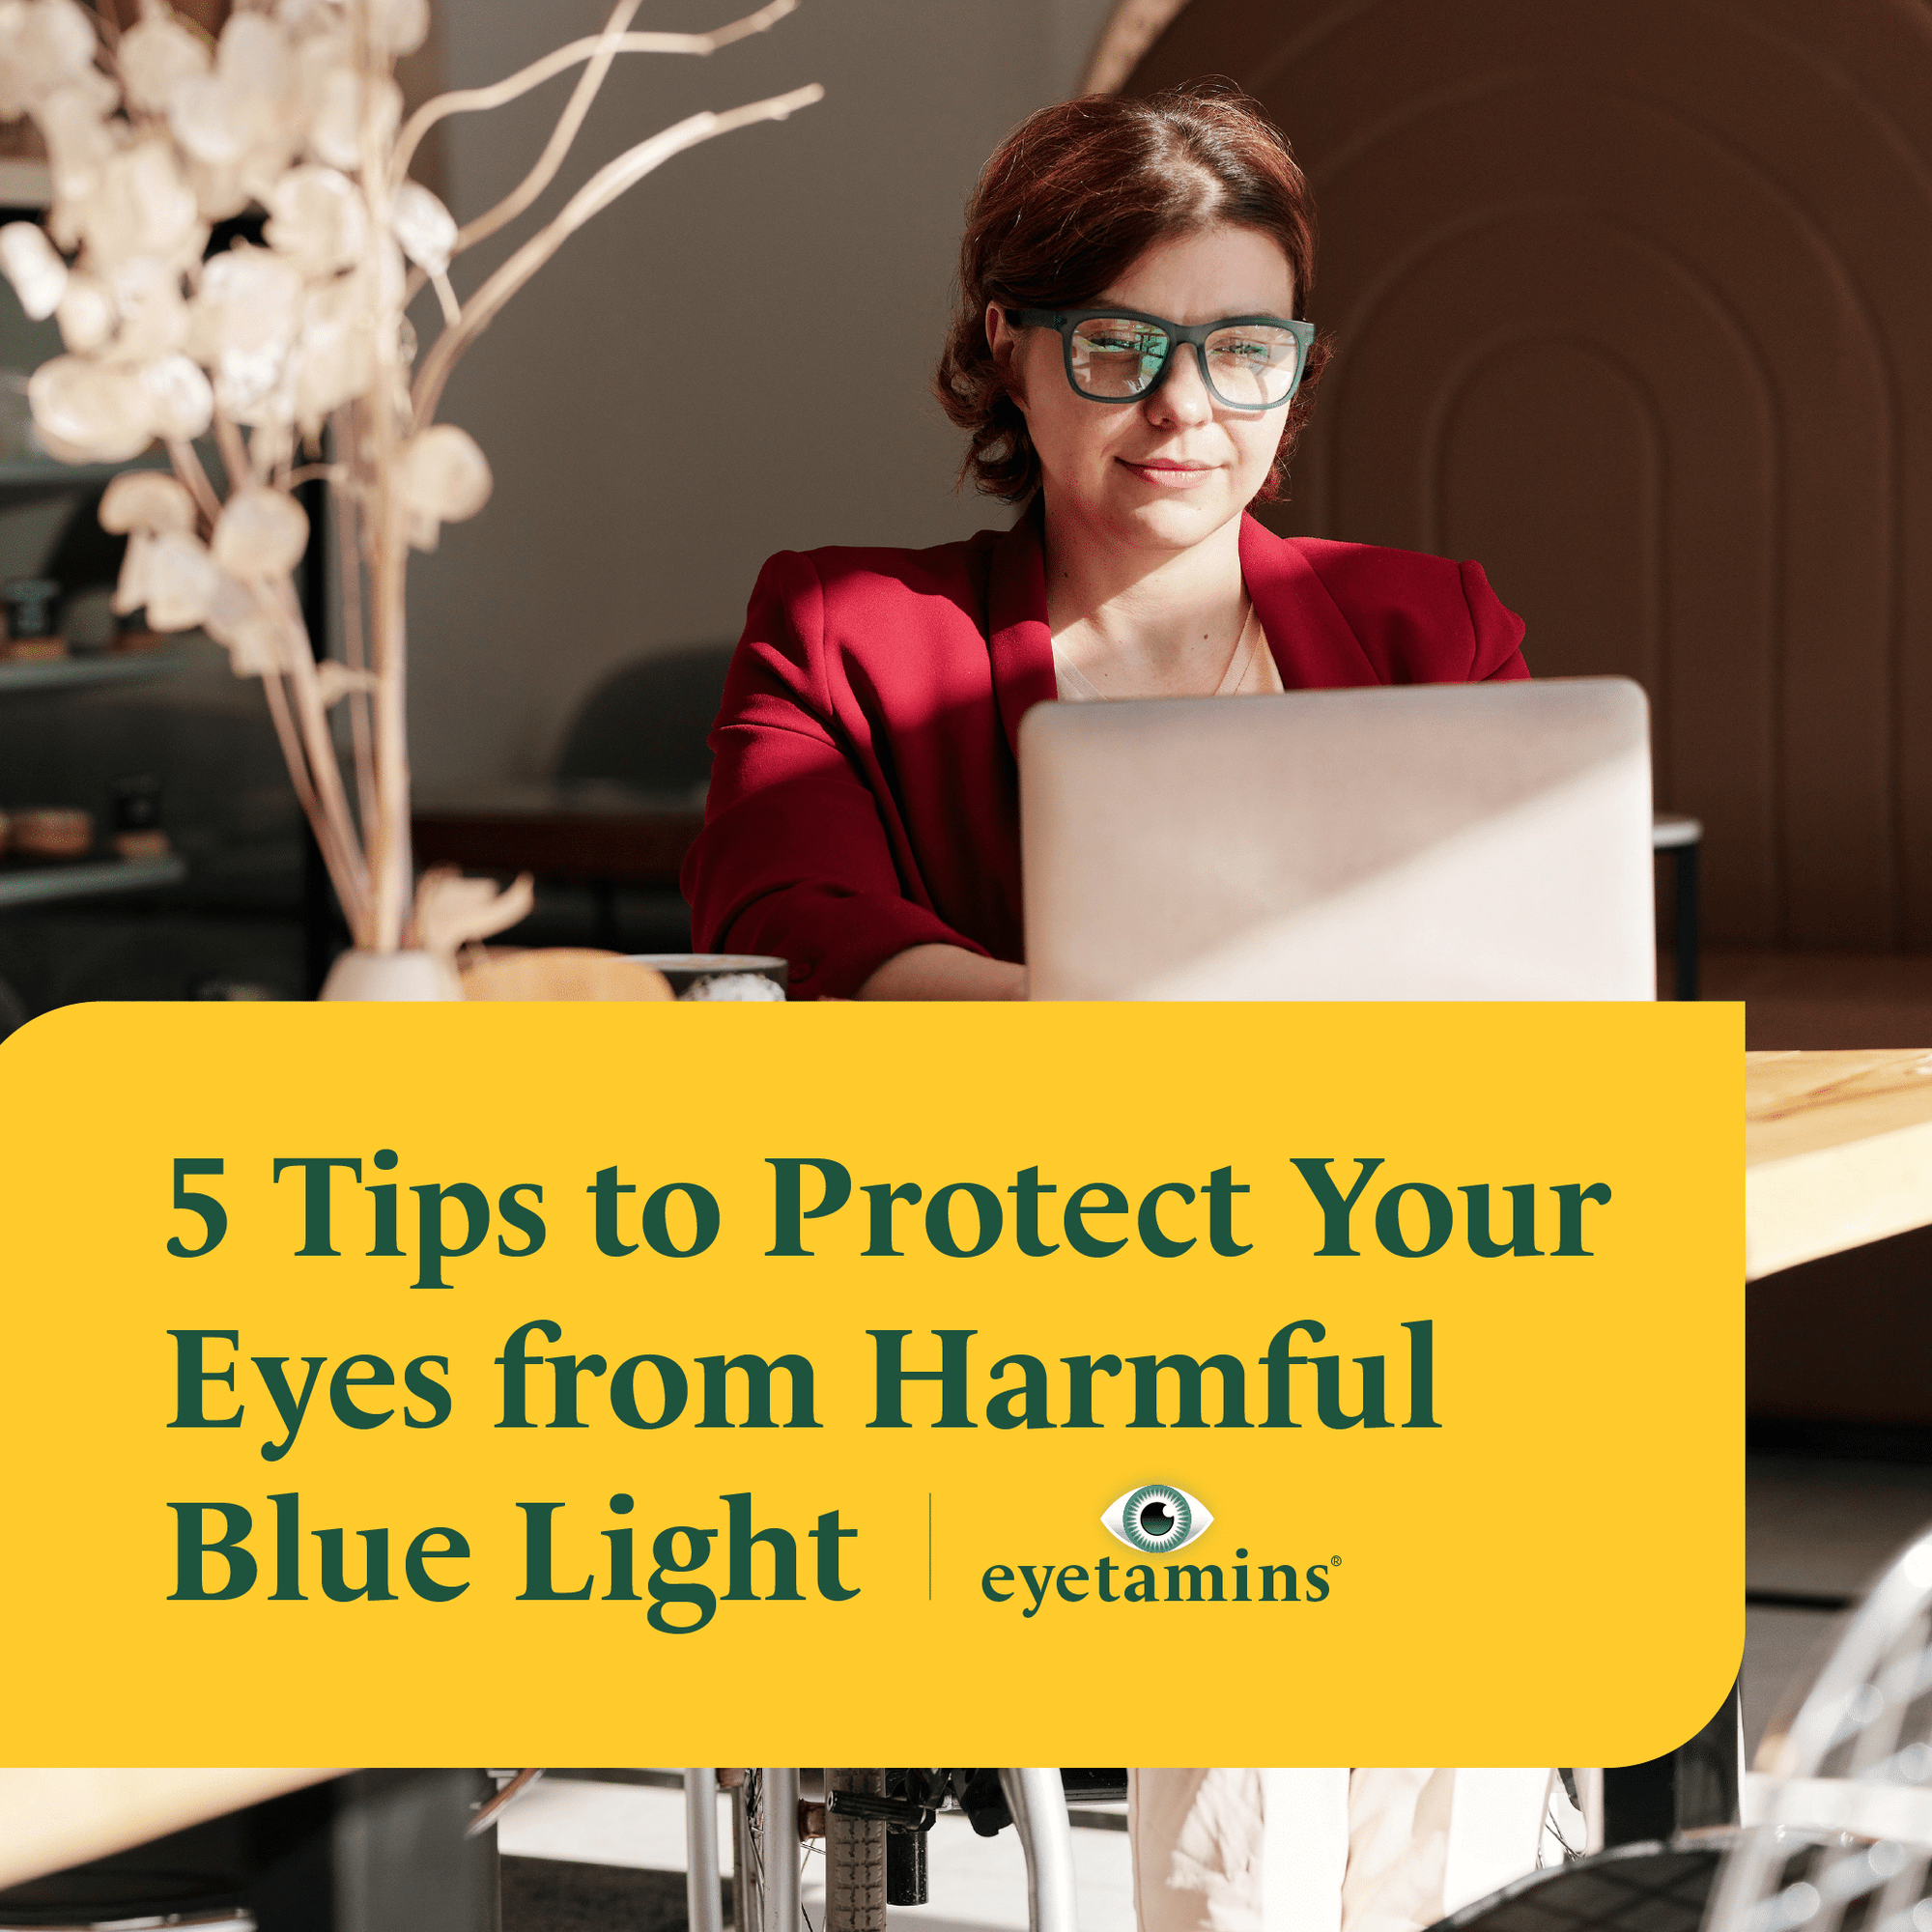 Eyetamins - 5 Tips to Protect Your Eyes from Harmful Blue Light